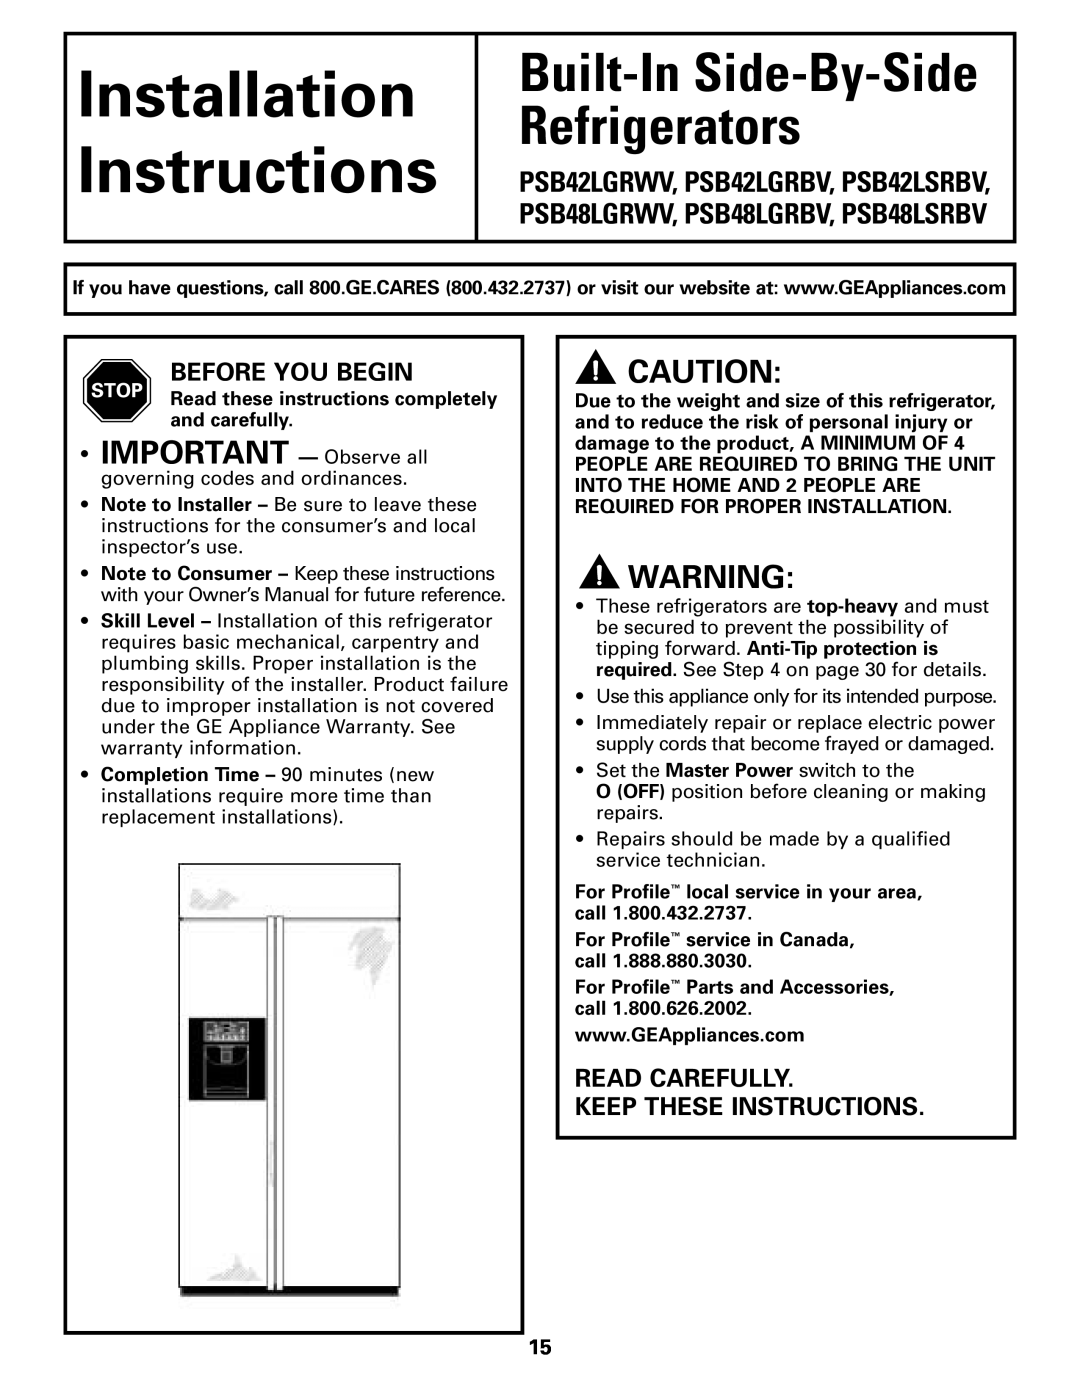 GE 48, 42 owner manual Before You Begin, Read Carefully Keep These Instructions, Installation Instructions 